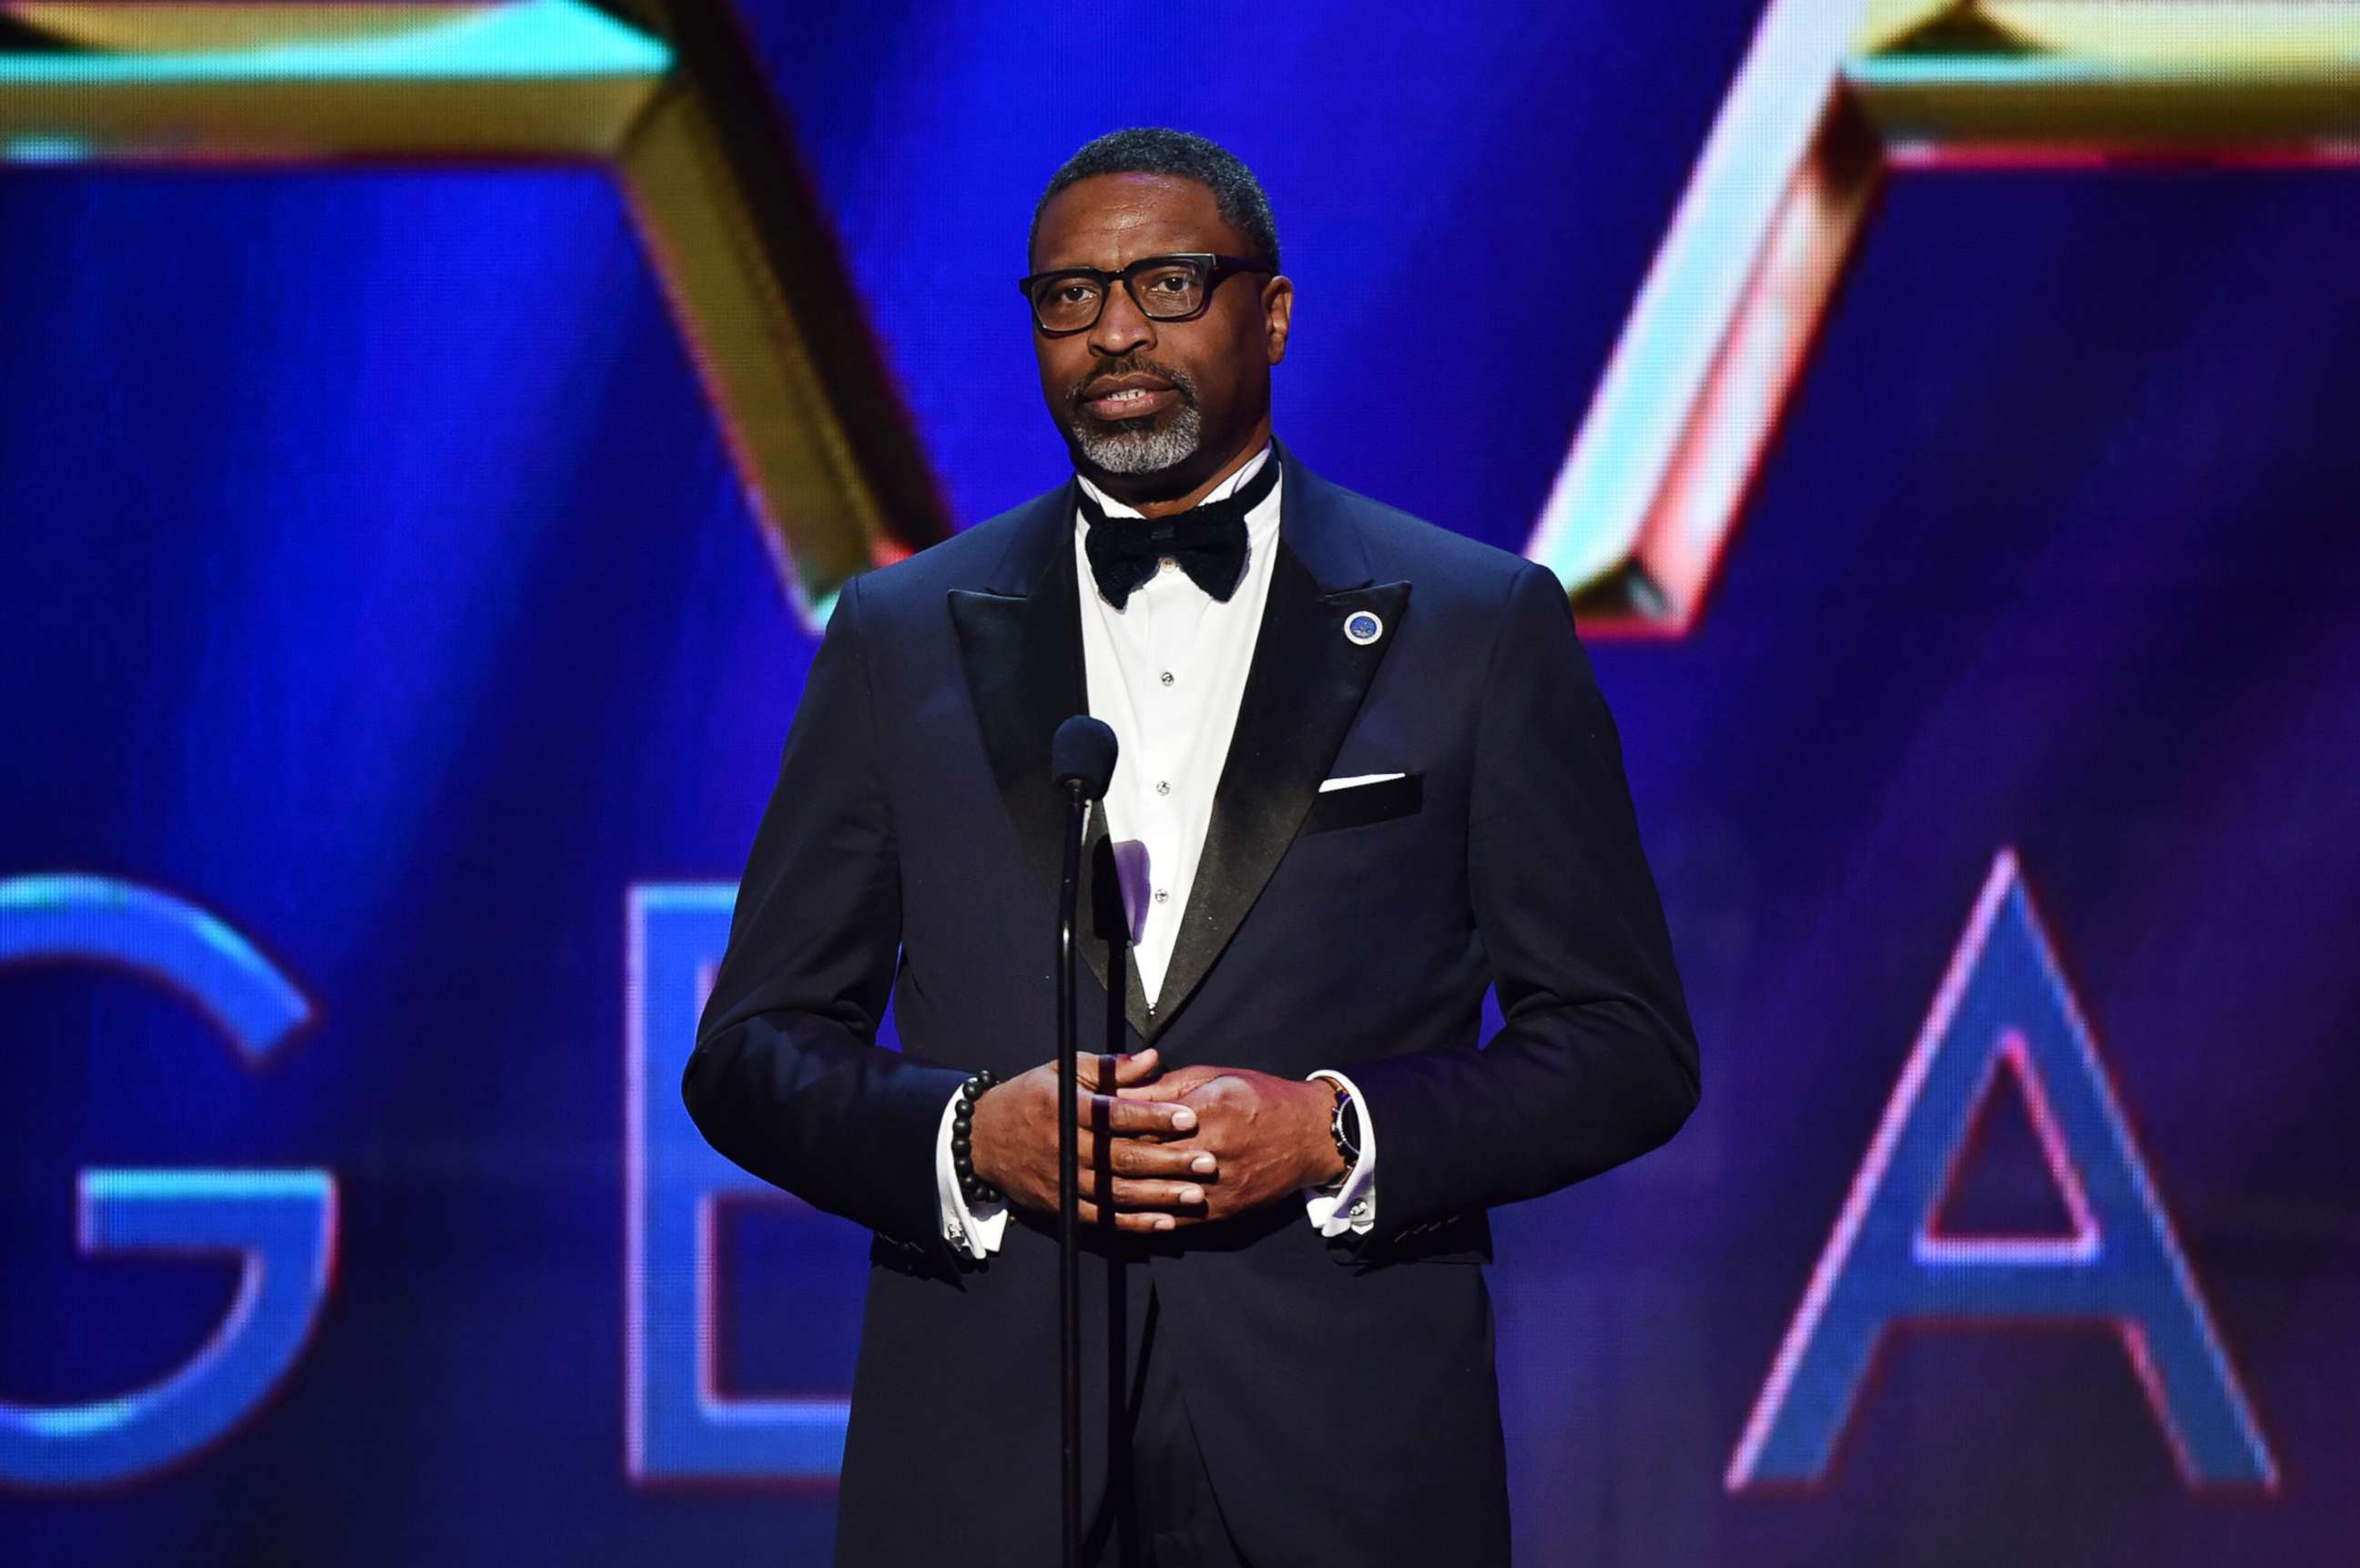 PHOTO: NAACP President and CEO Derrick Johnson speaks onstage during the 51st NAACP Image Awards, on Feb. 22, 2020 in Pasadena, Calif.